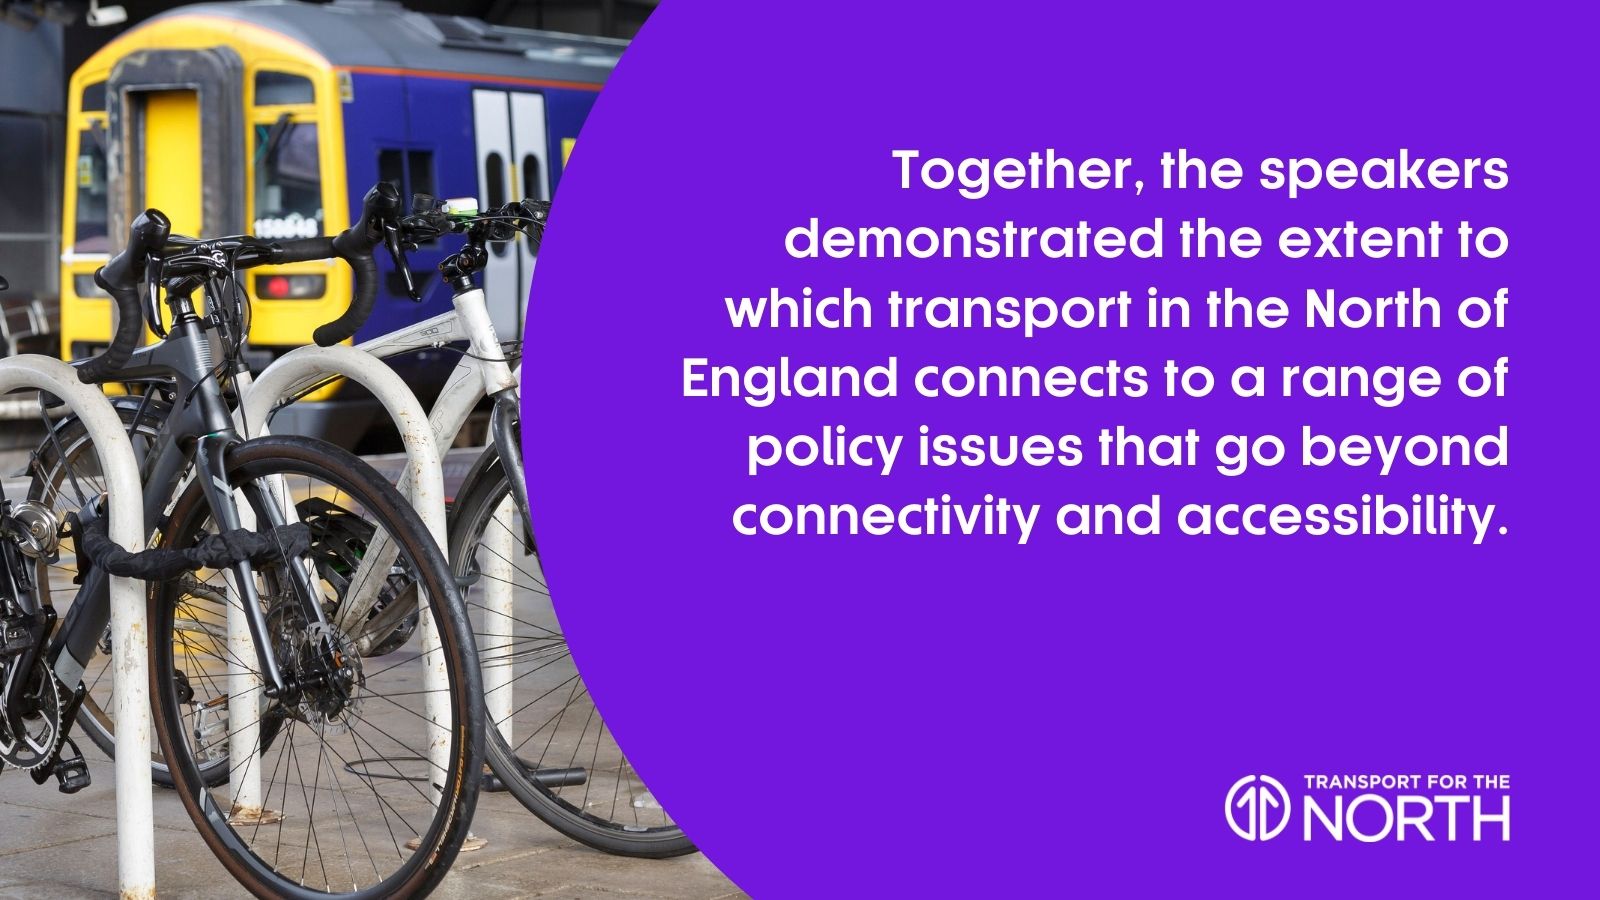 Improving transport decision-making and prioritisations in the North of England